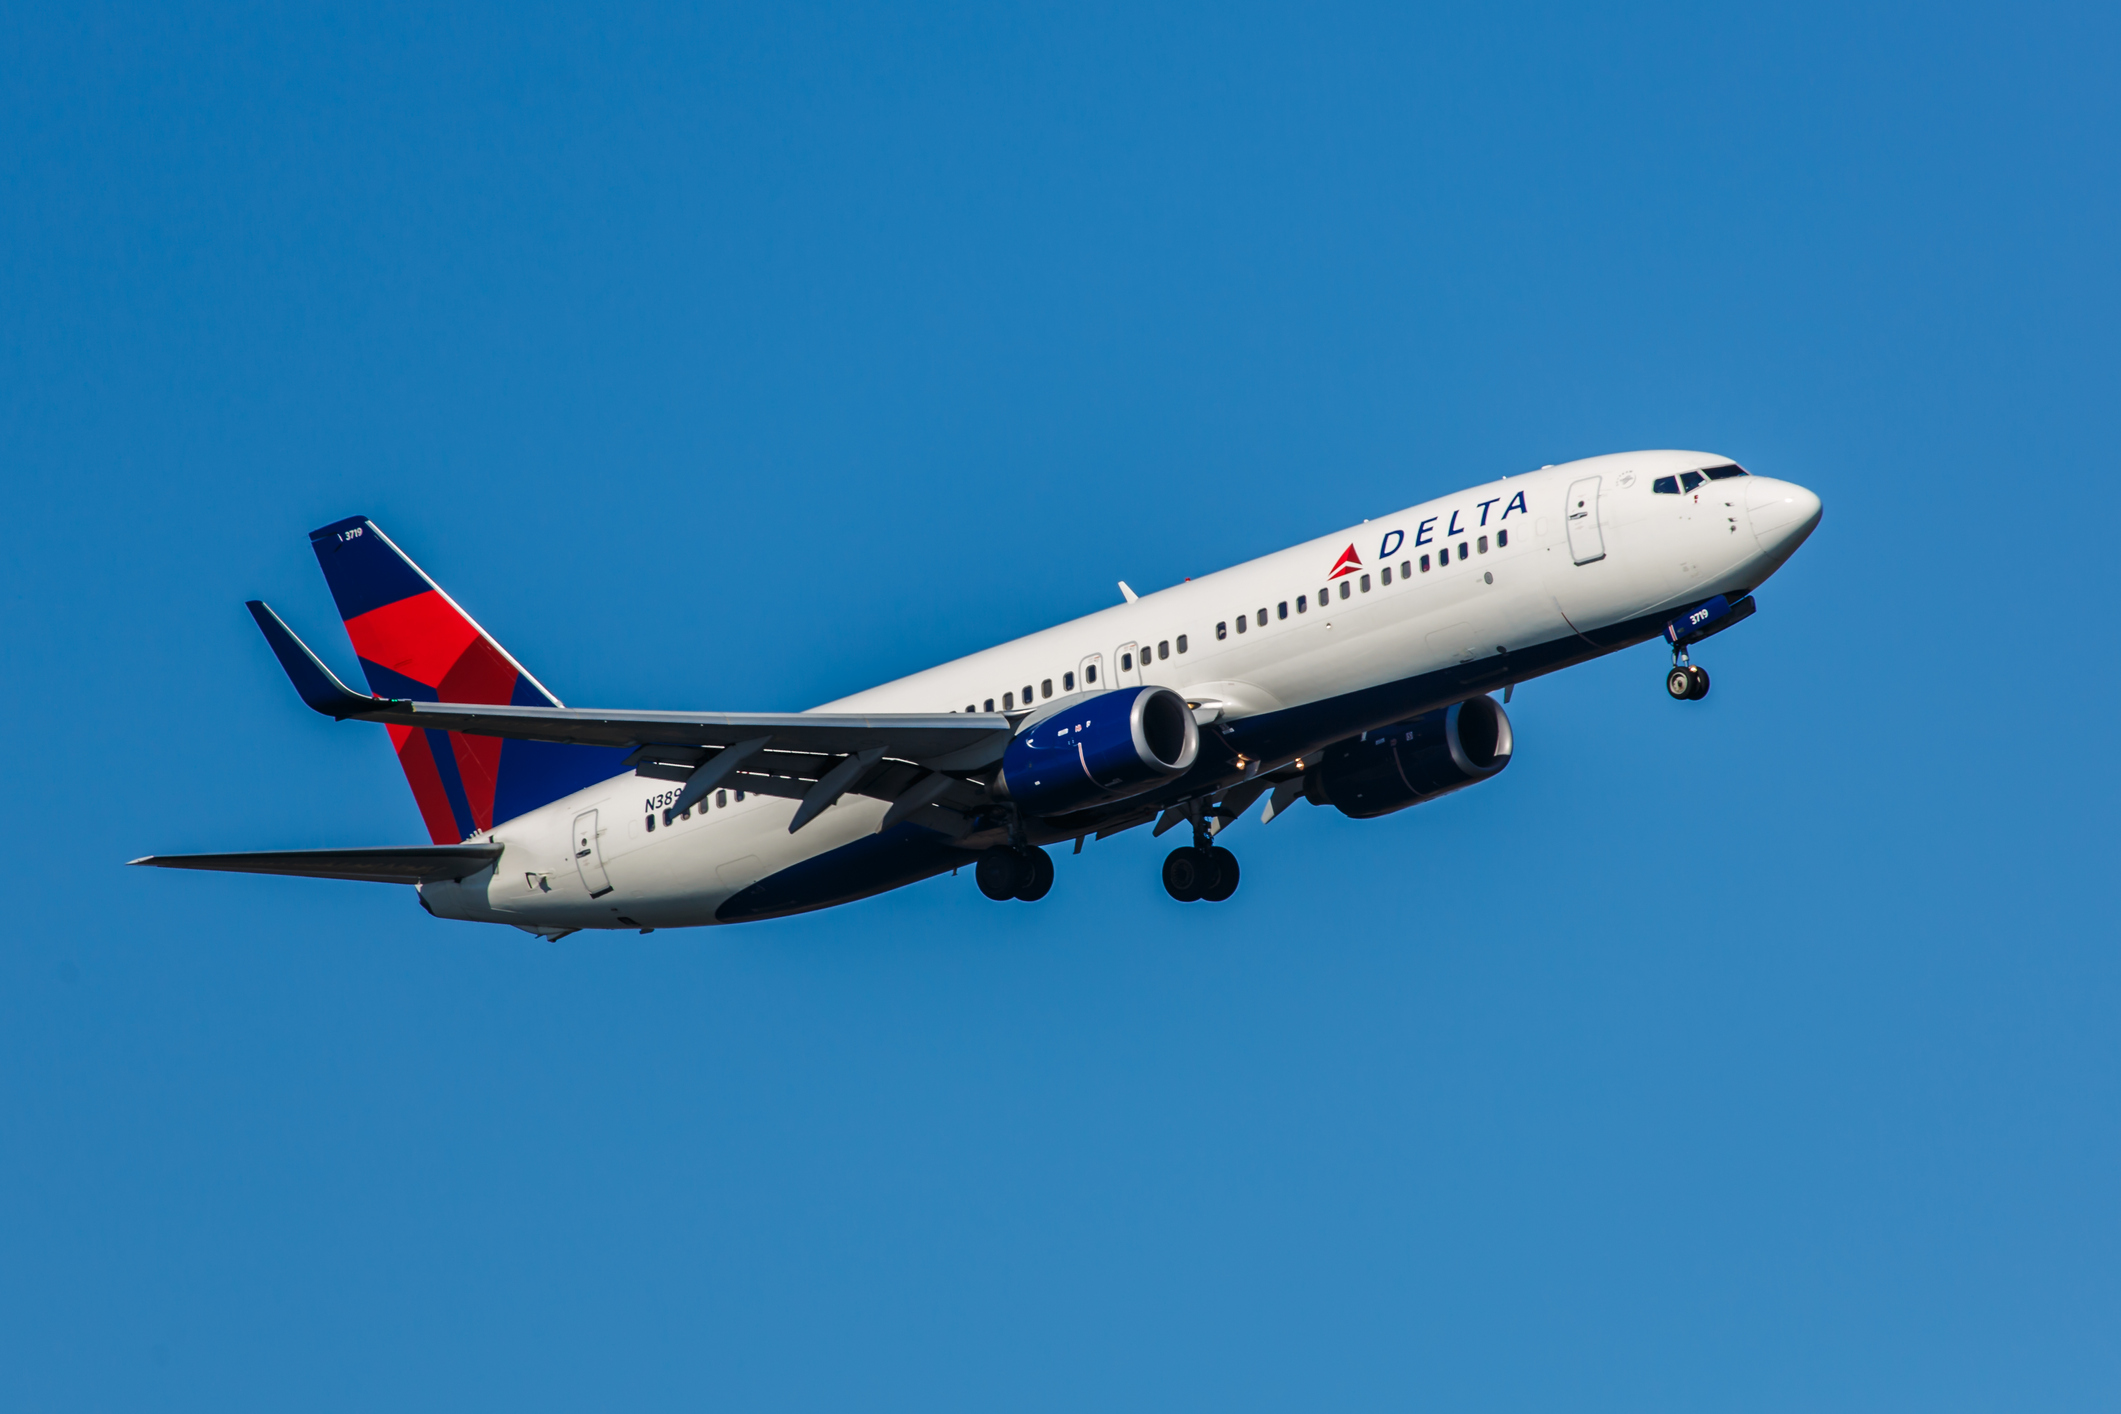 Face Coverings Now Optional for Delta Employees and Passengers!